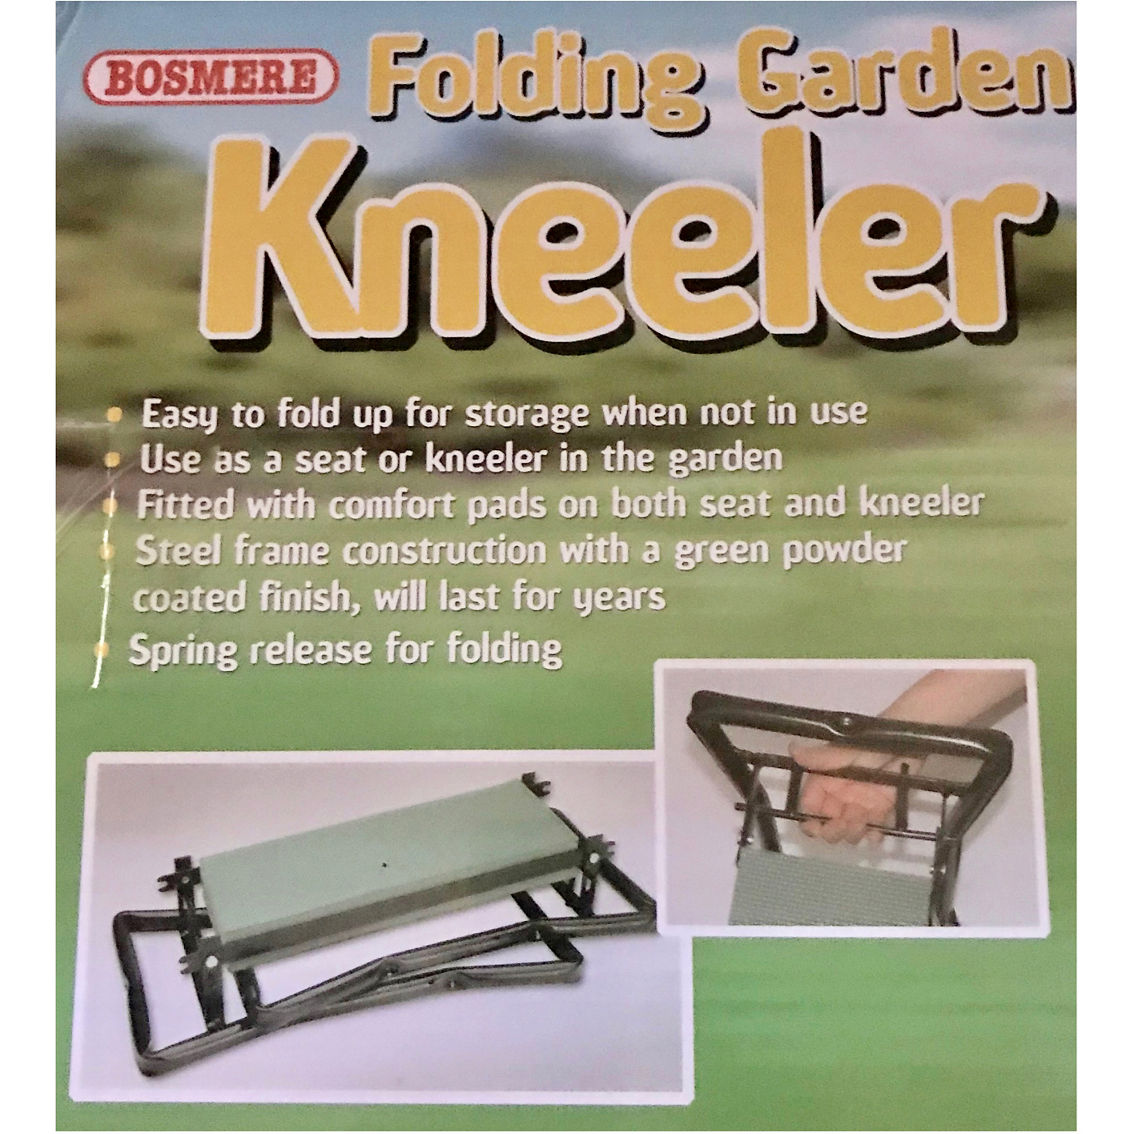 Bosmere 24 in. Folding Kneeler and Garden Seat - Image 4 of 5